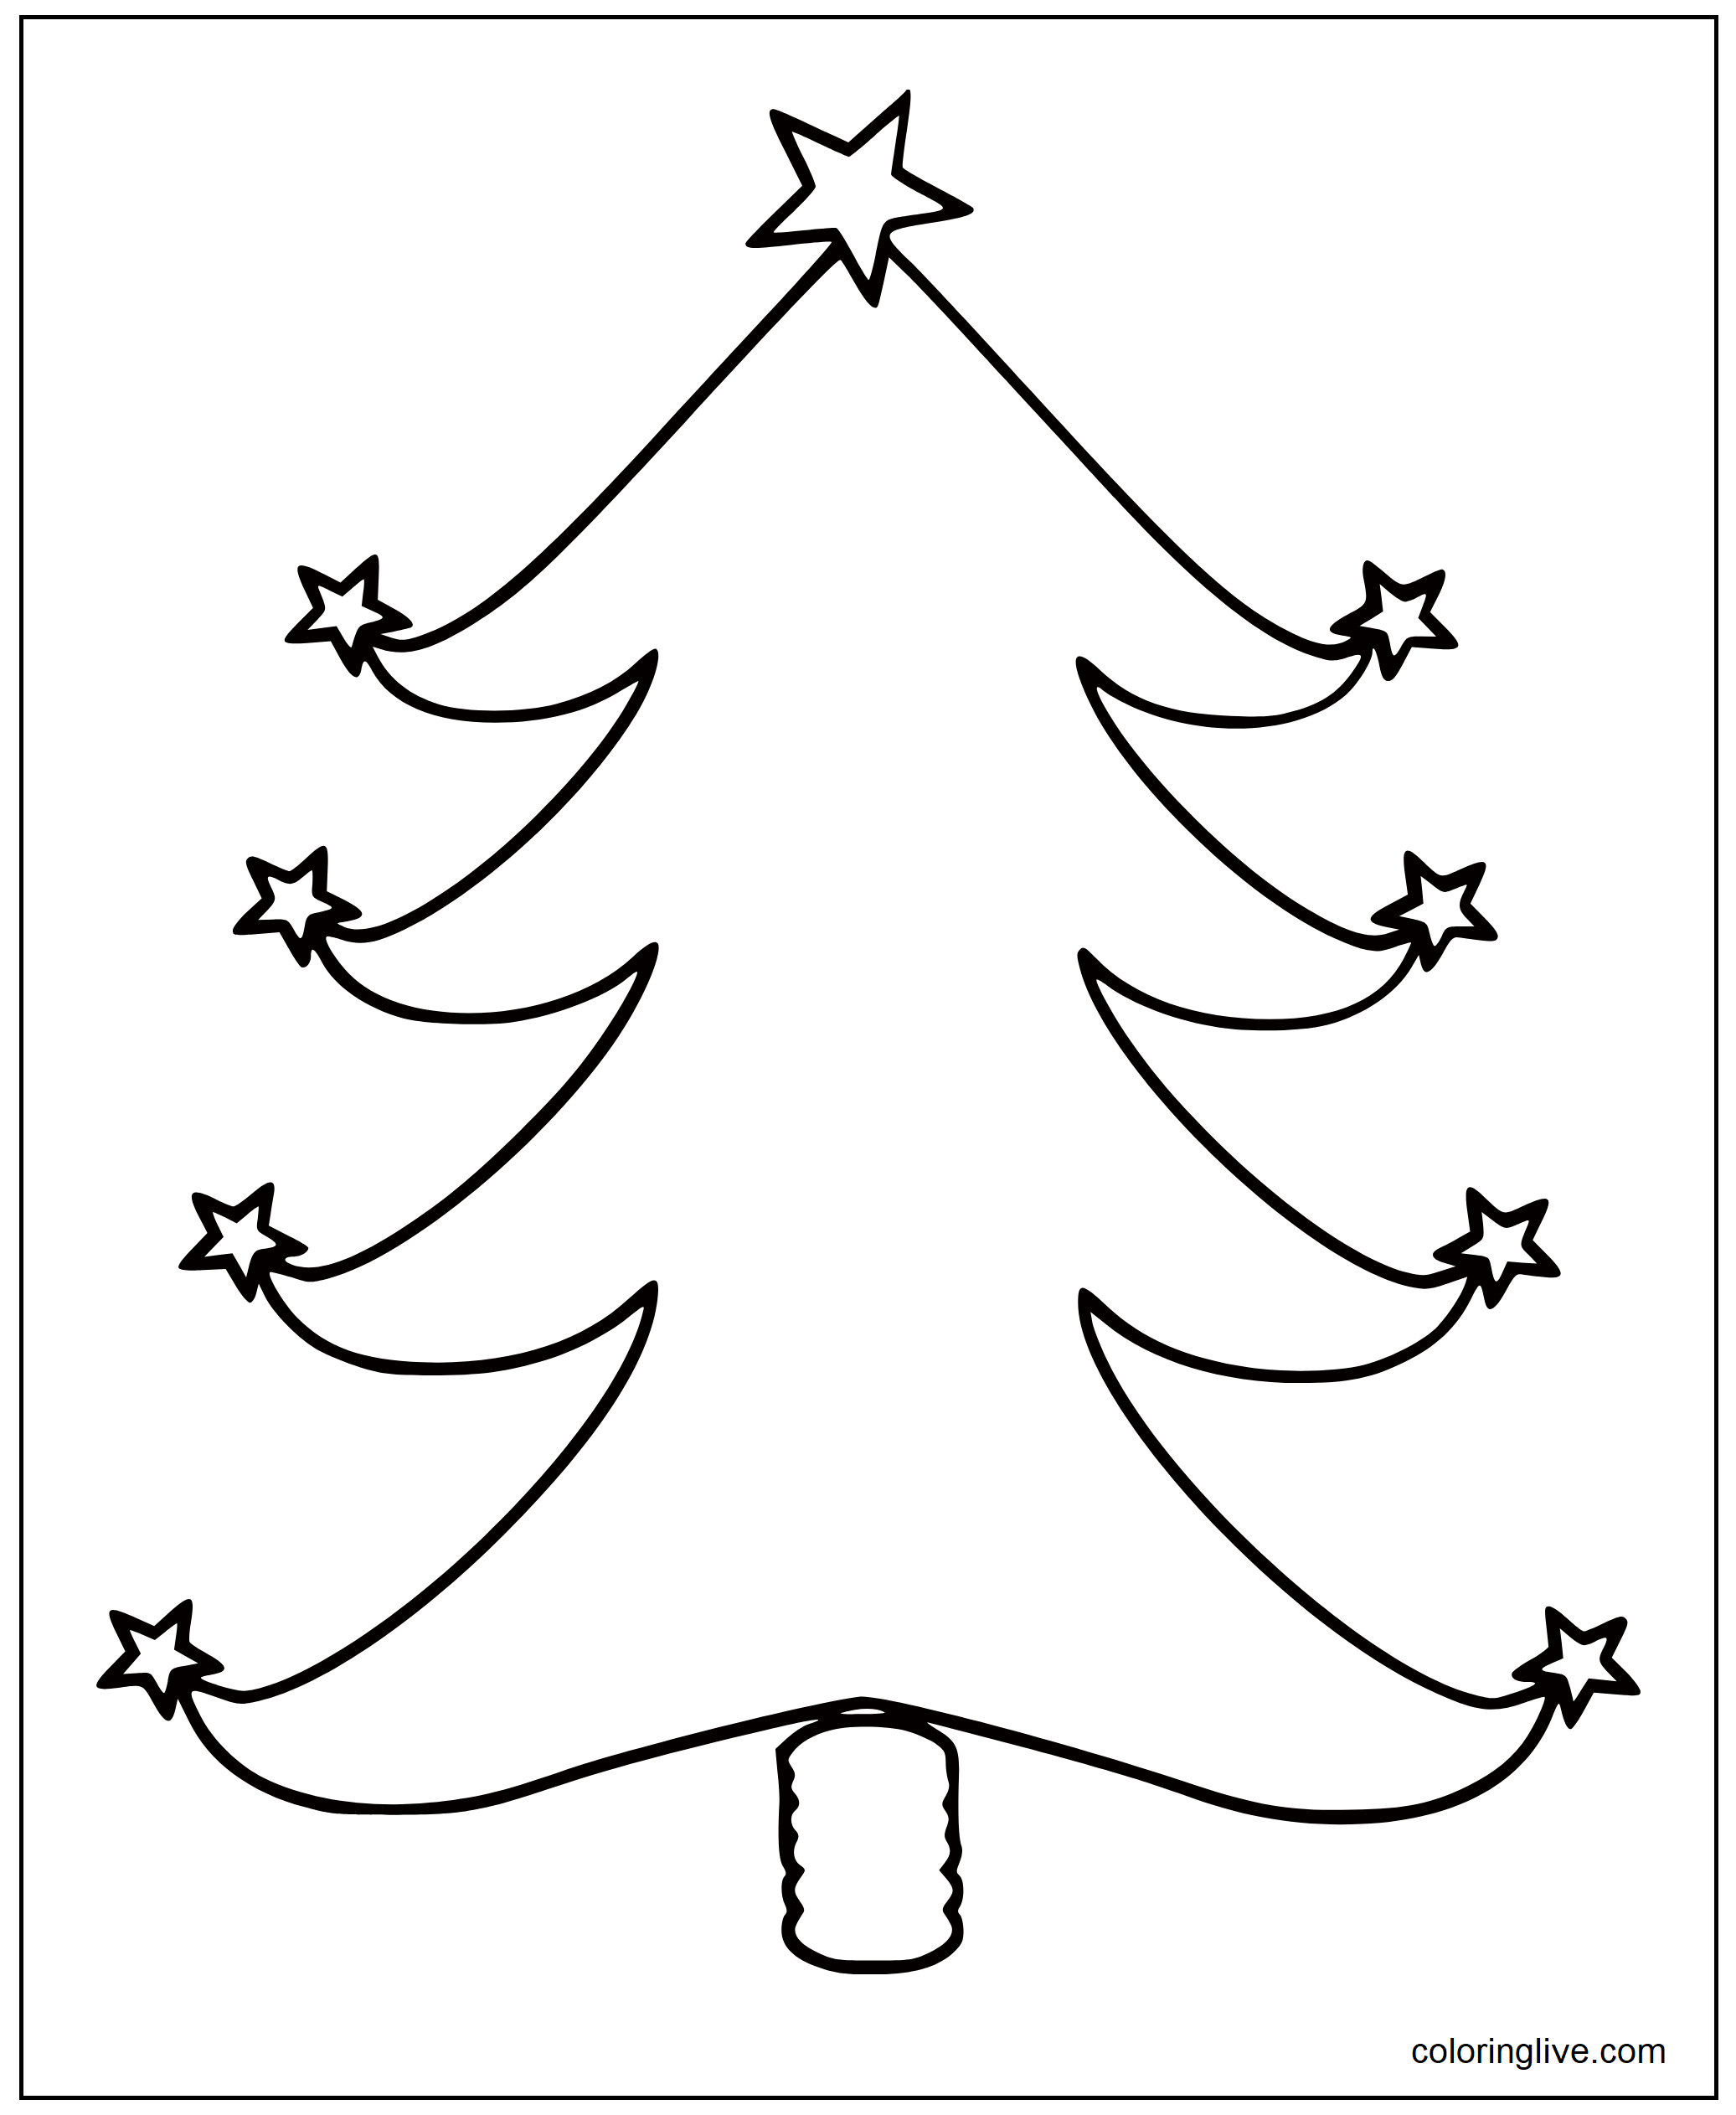 Printable Christmas Tree for Children to Color Coloring Page for kids.